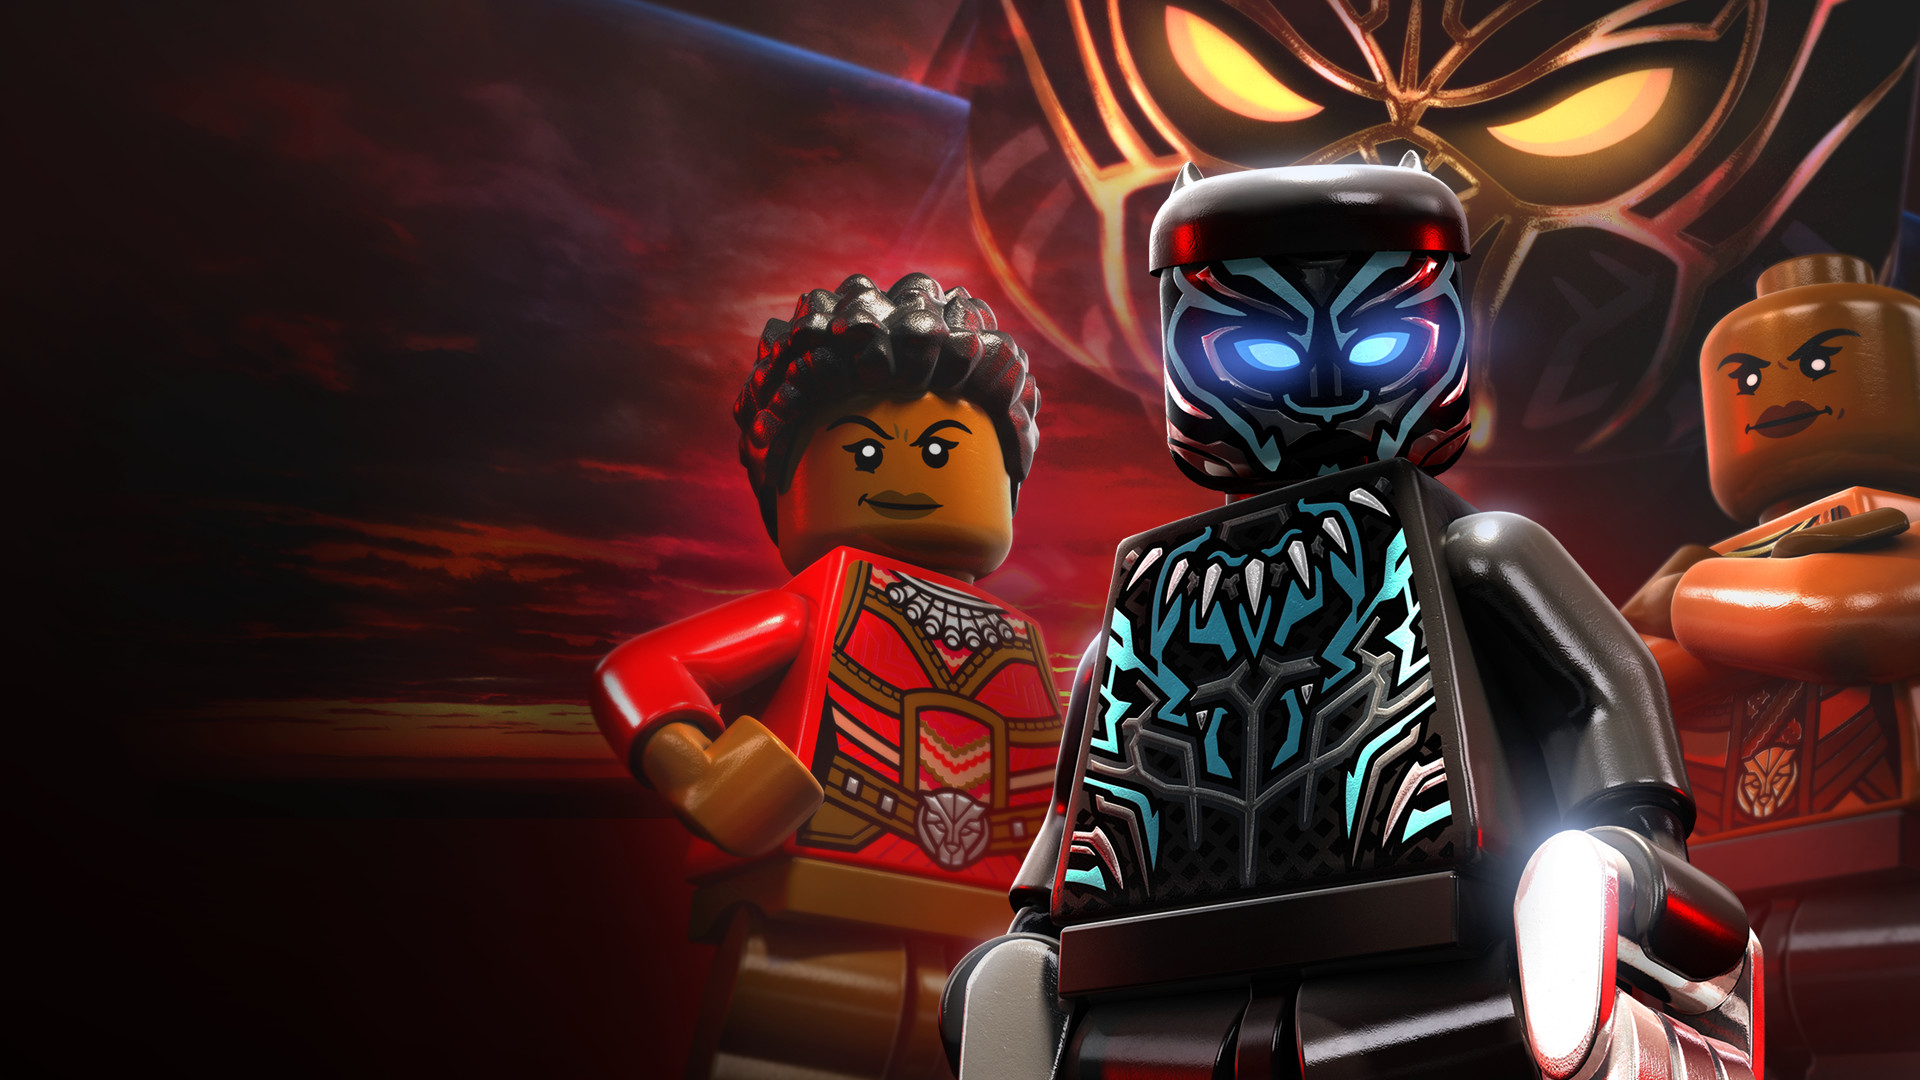 LEGO® Marvel Super Heroes 2 - Marvel's Black Panther Movie Character and  Level Pack on Steam